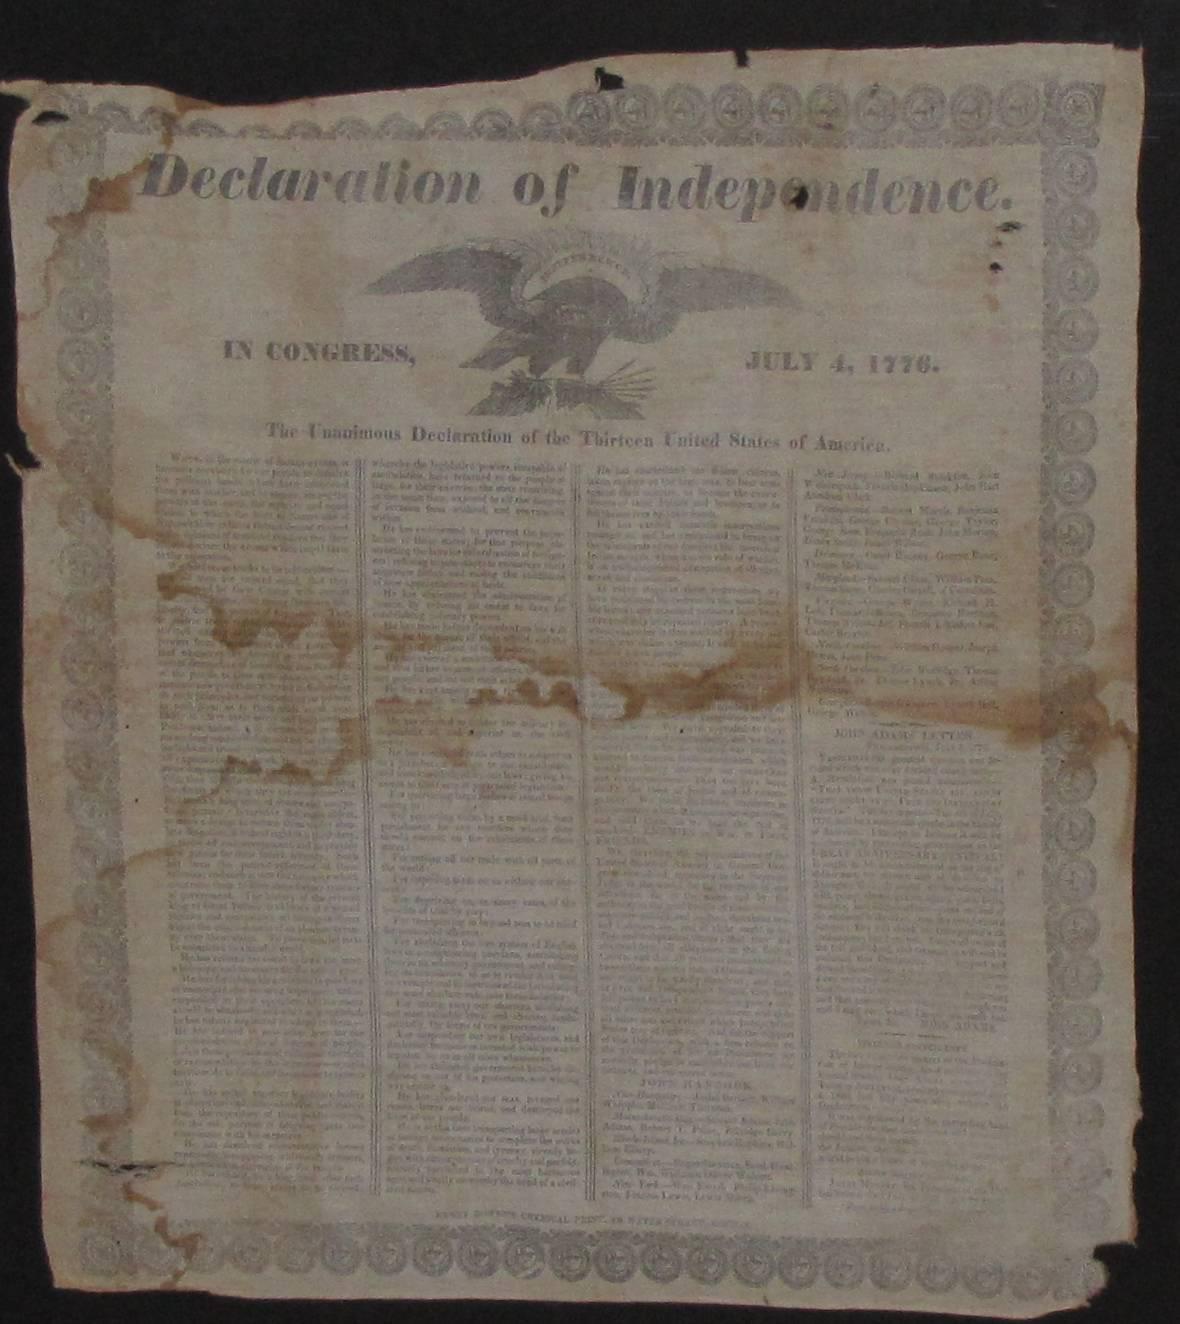 1832 Declaration of Independence

Rare printing on to fine cotton cloth. Made by Henry Bowen of Boston in 1832 by the his “Chemical Print” process.

The Declaration has some damage and loss and some staining but even in this condition it is a